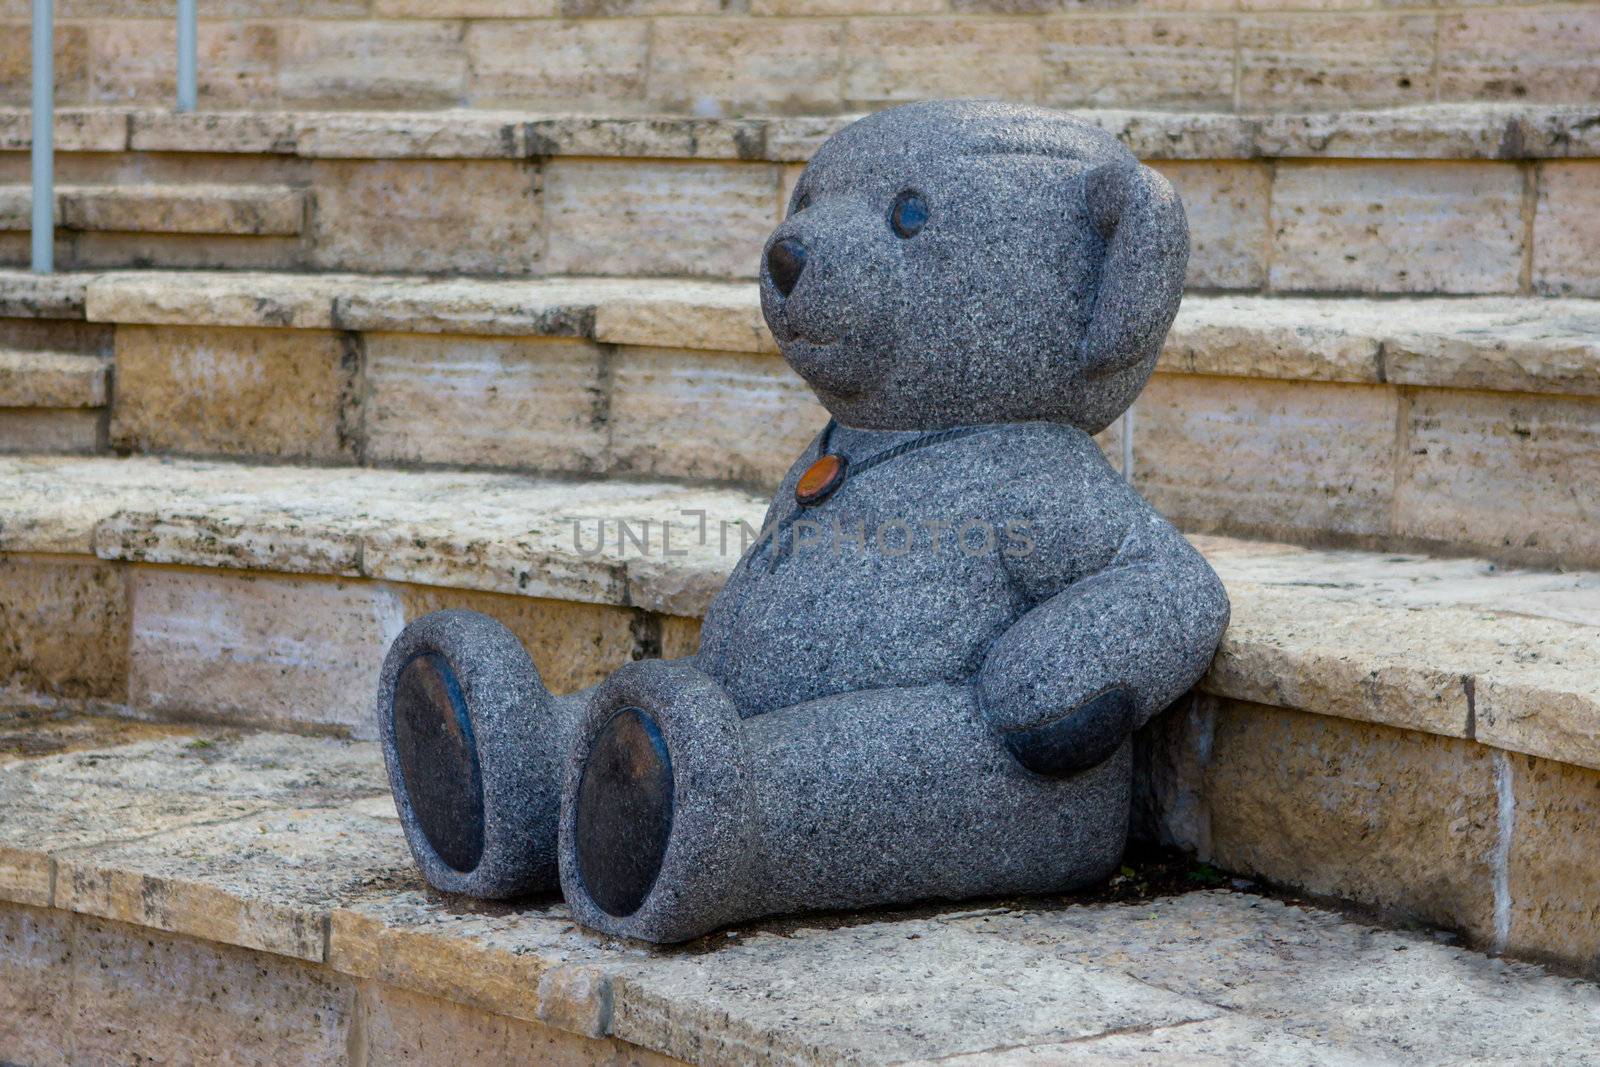 Marble statue of a Teddy Bear in a play area.